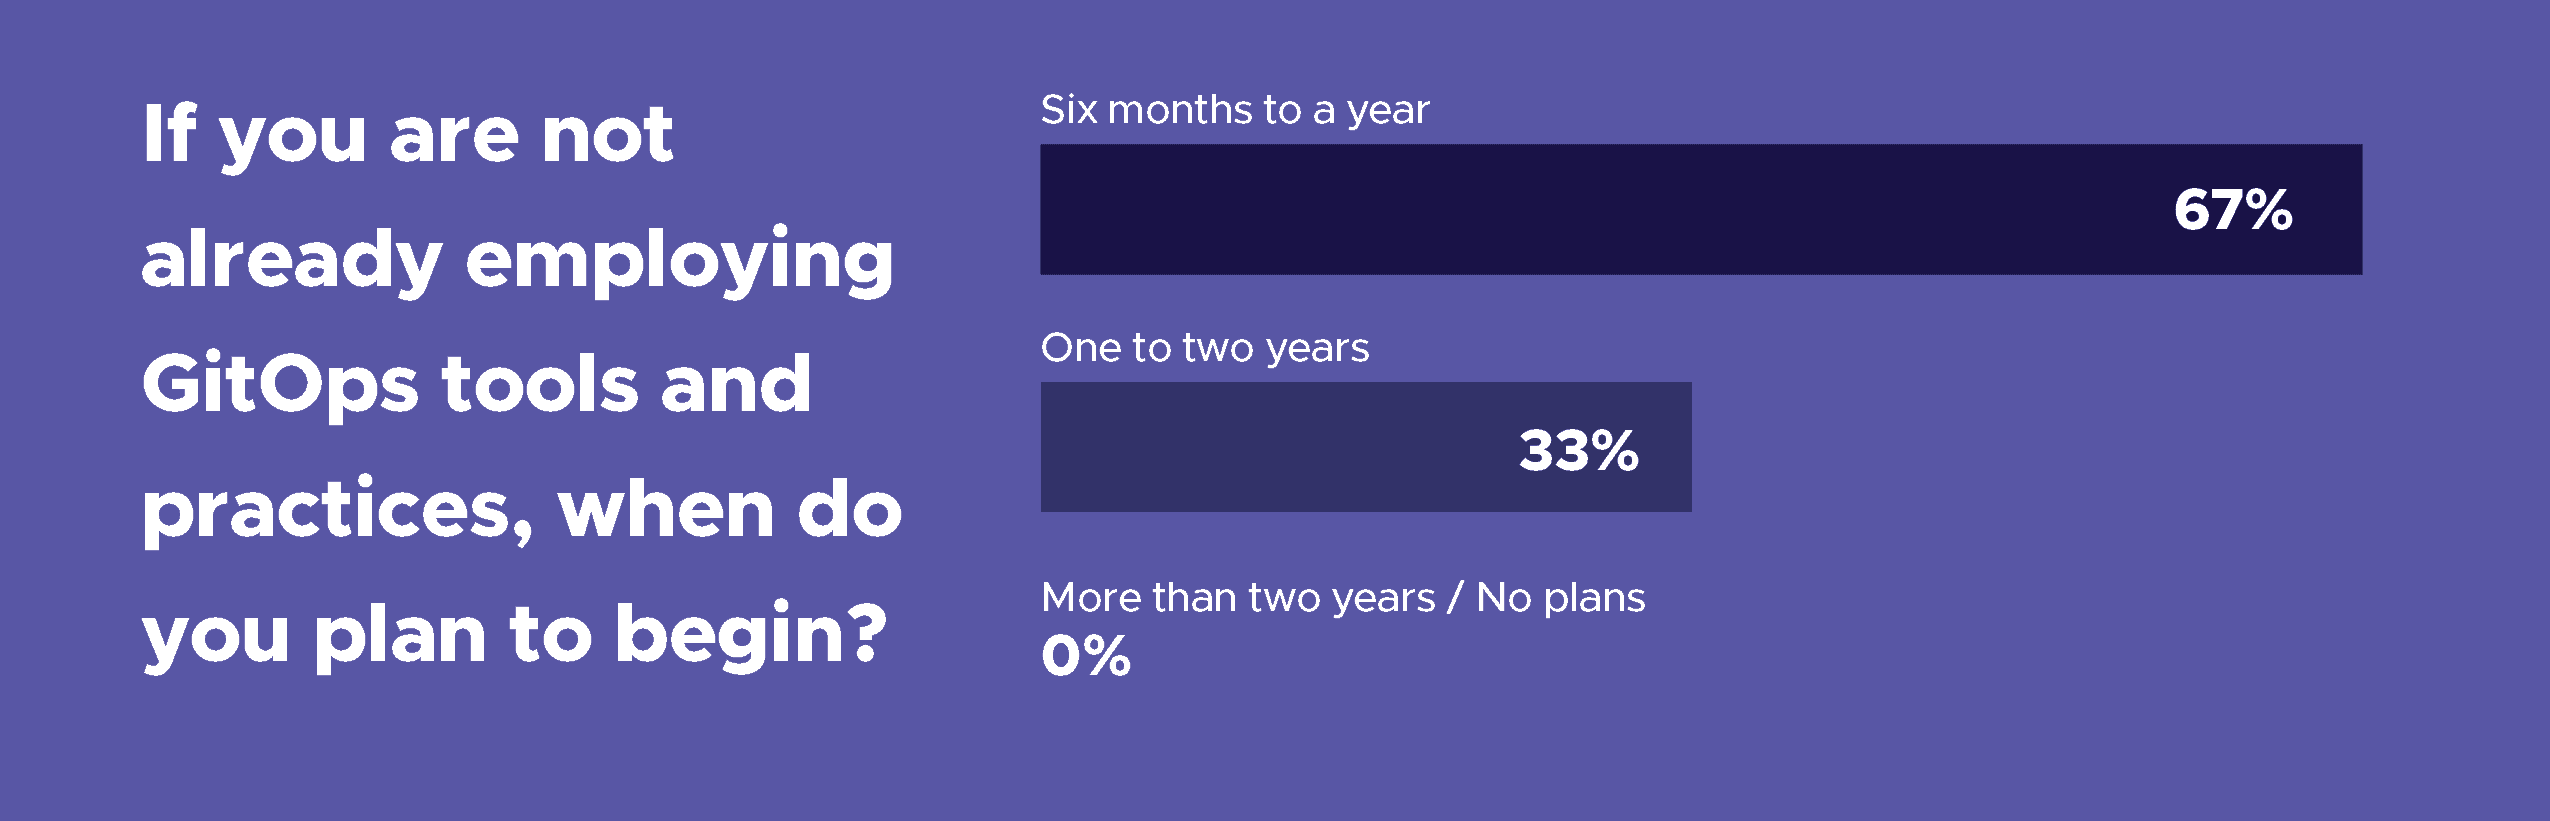 Bar chart showing respondent's respond towards question "If you are not already employing GitOps tools and practices, when do you plan to begin?" 67% of the respondents chose "six months to a year" while 33% chose "one to two years"